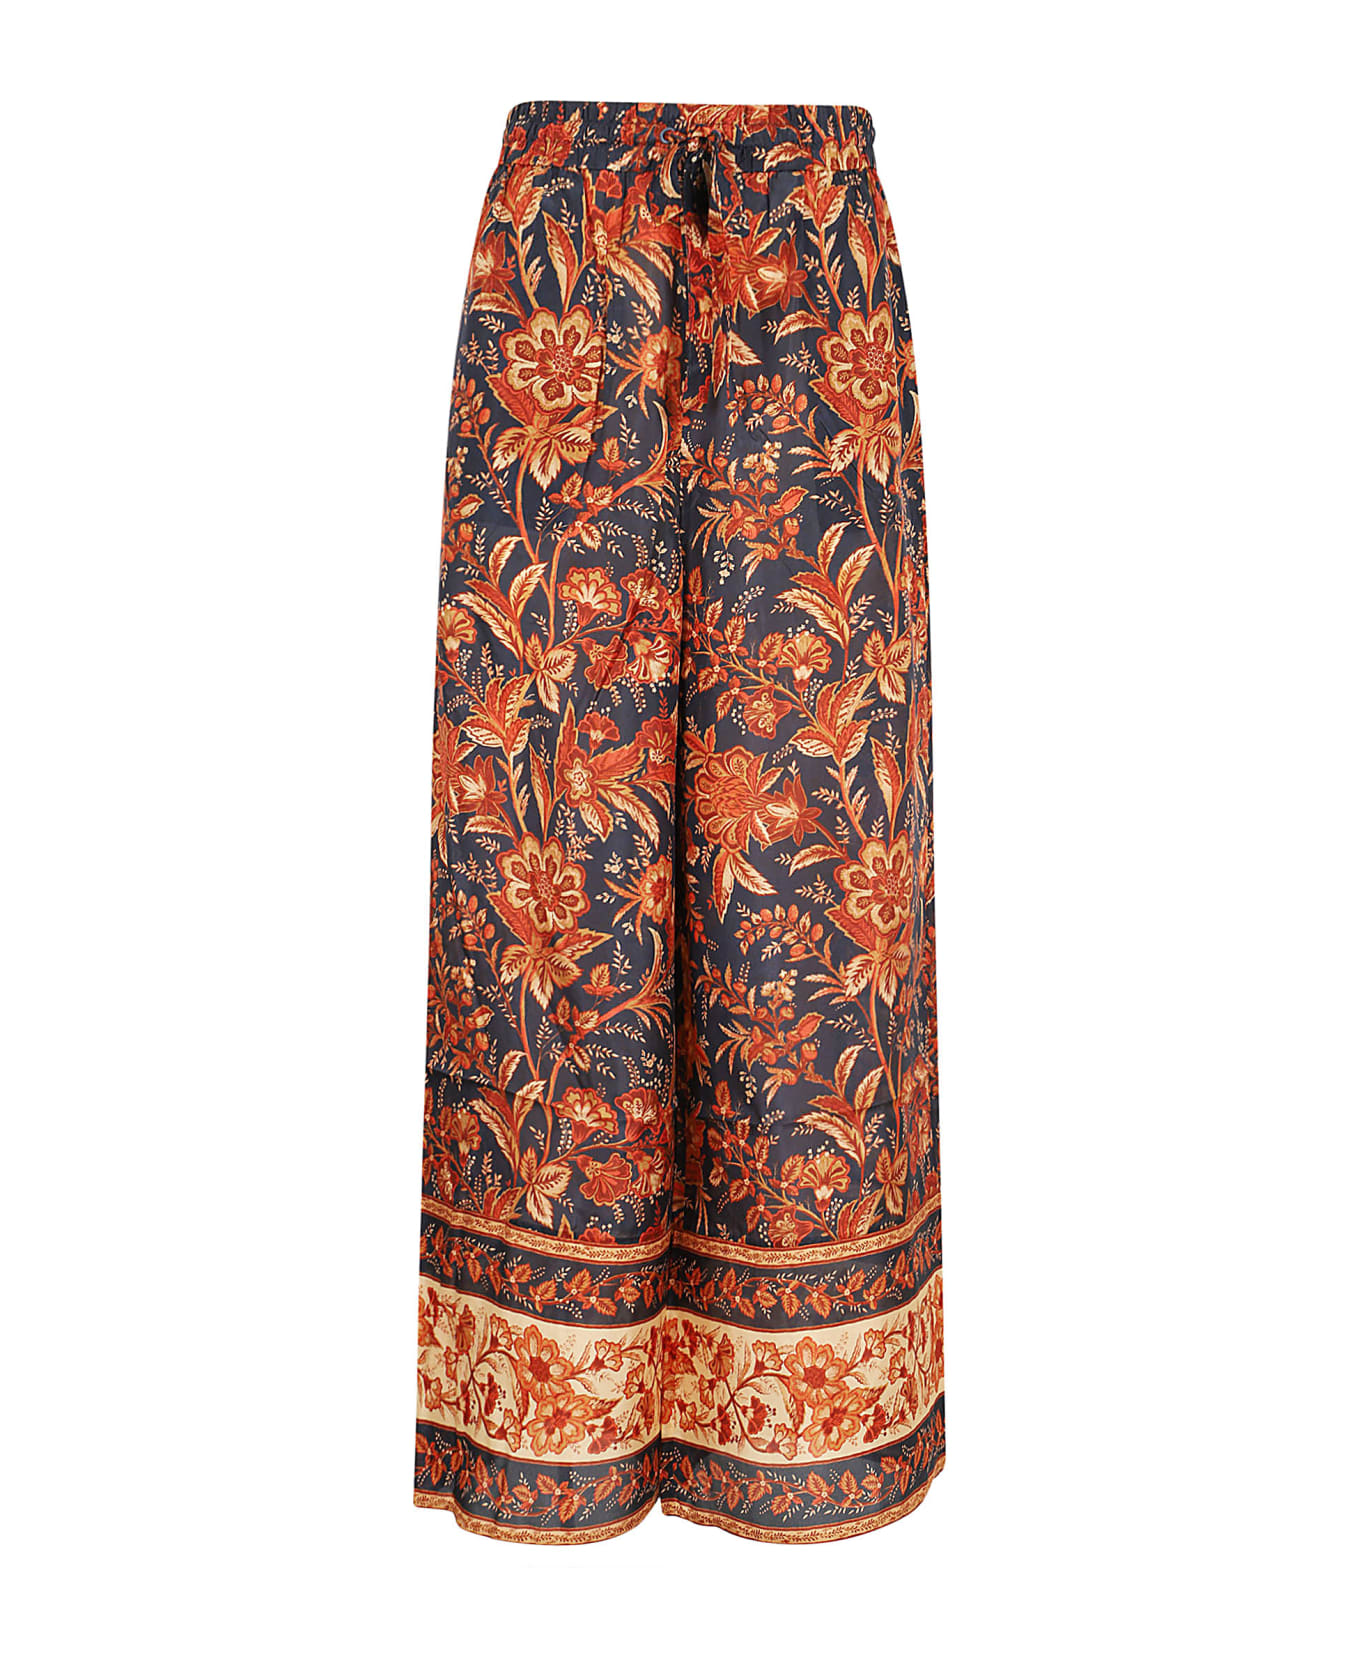 Zimmermann Junie Relaxed Pant - Dnf Dark Navy Floral ボトムス